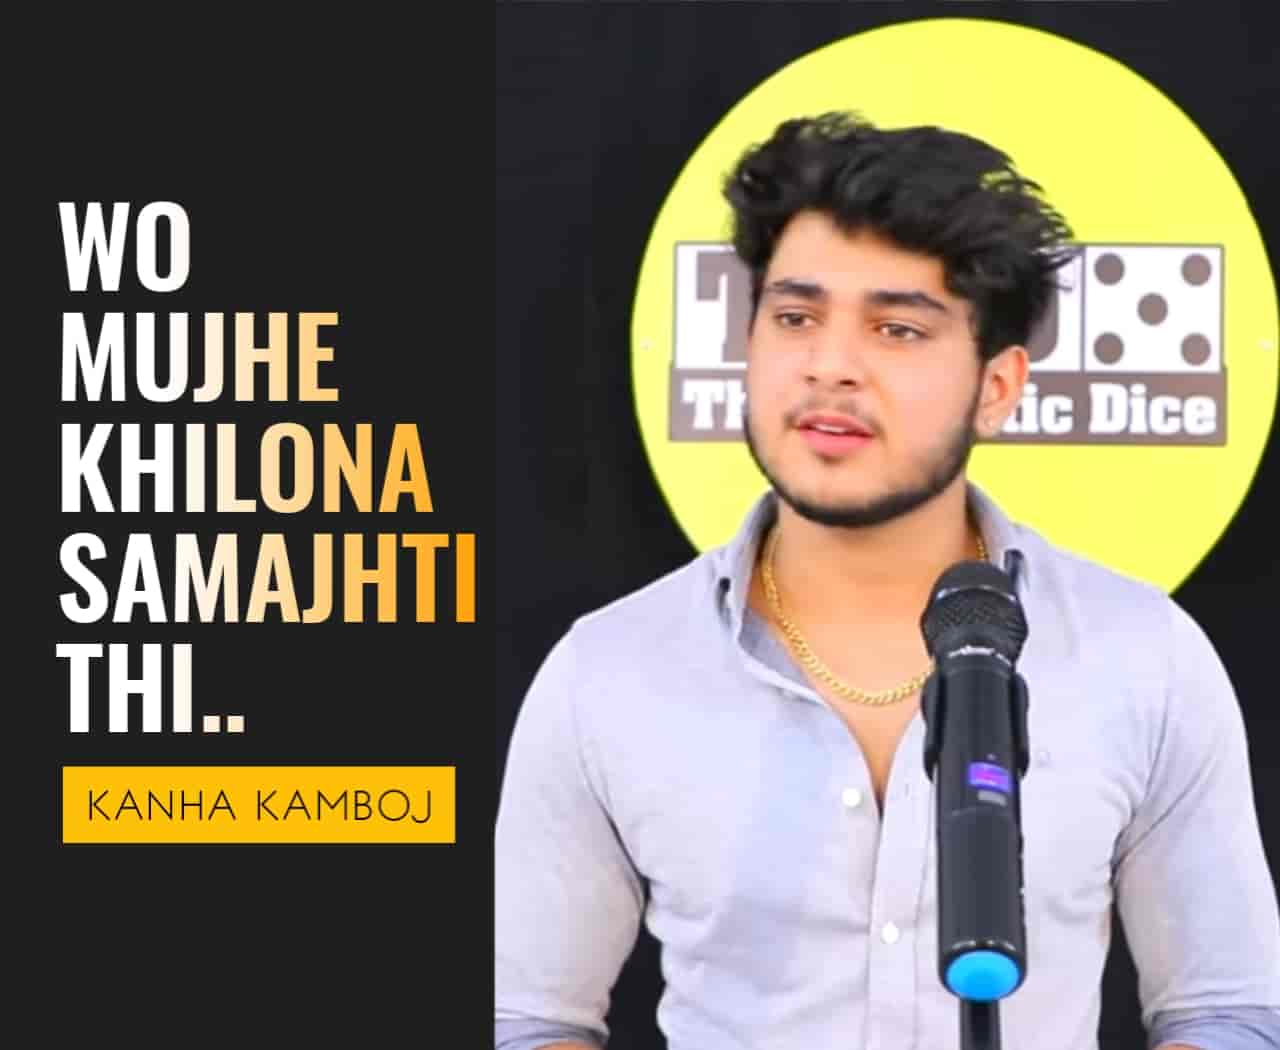 This beautiful Poetry  'Wo Mujhe Khilona Samajhti Thi' for The Realistic Dice is performed by Kanha Kamboj and also written by him which is very beautiful a piece.